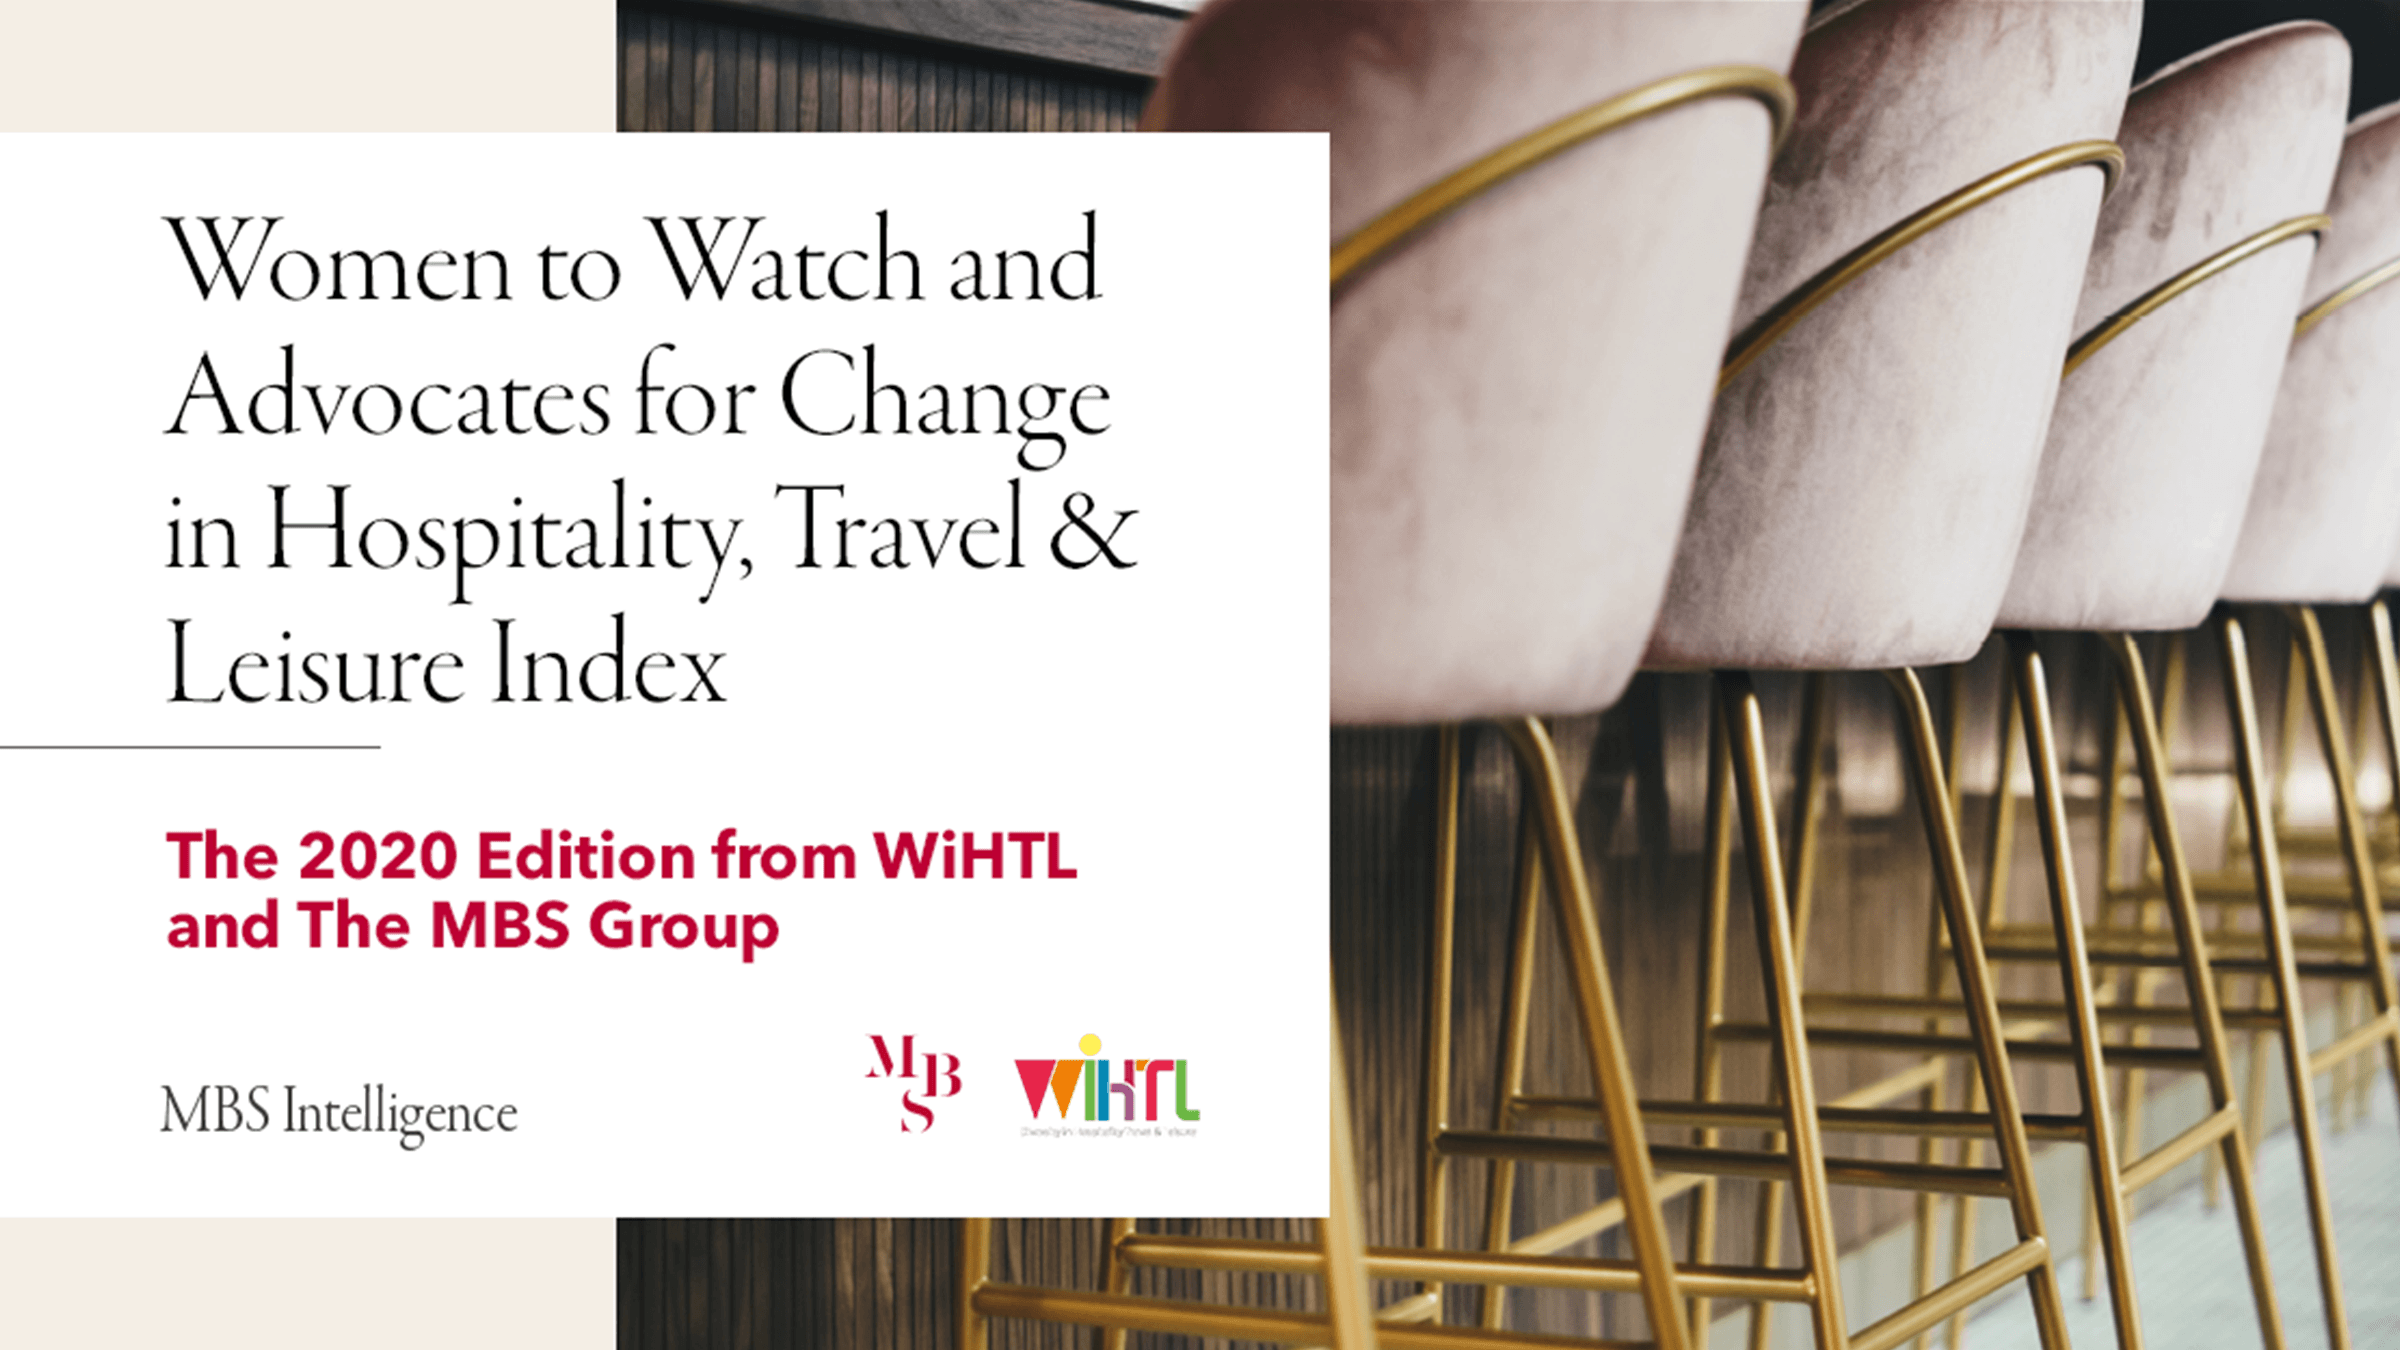 Launching the Women to Watch and Advocates for Change in Hospitality, Travel & Leisure Index 2020